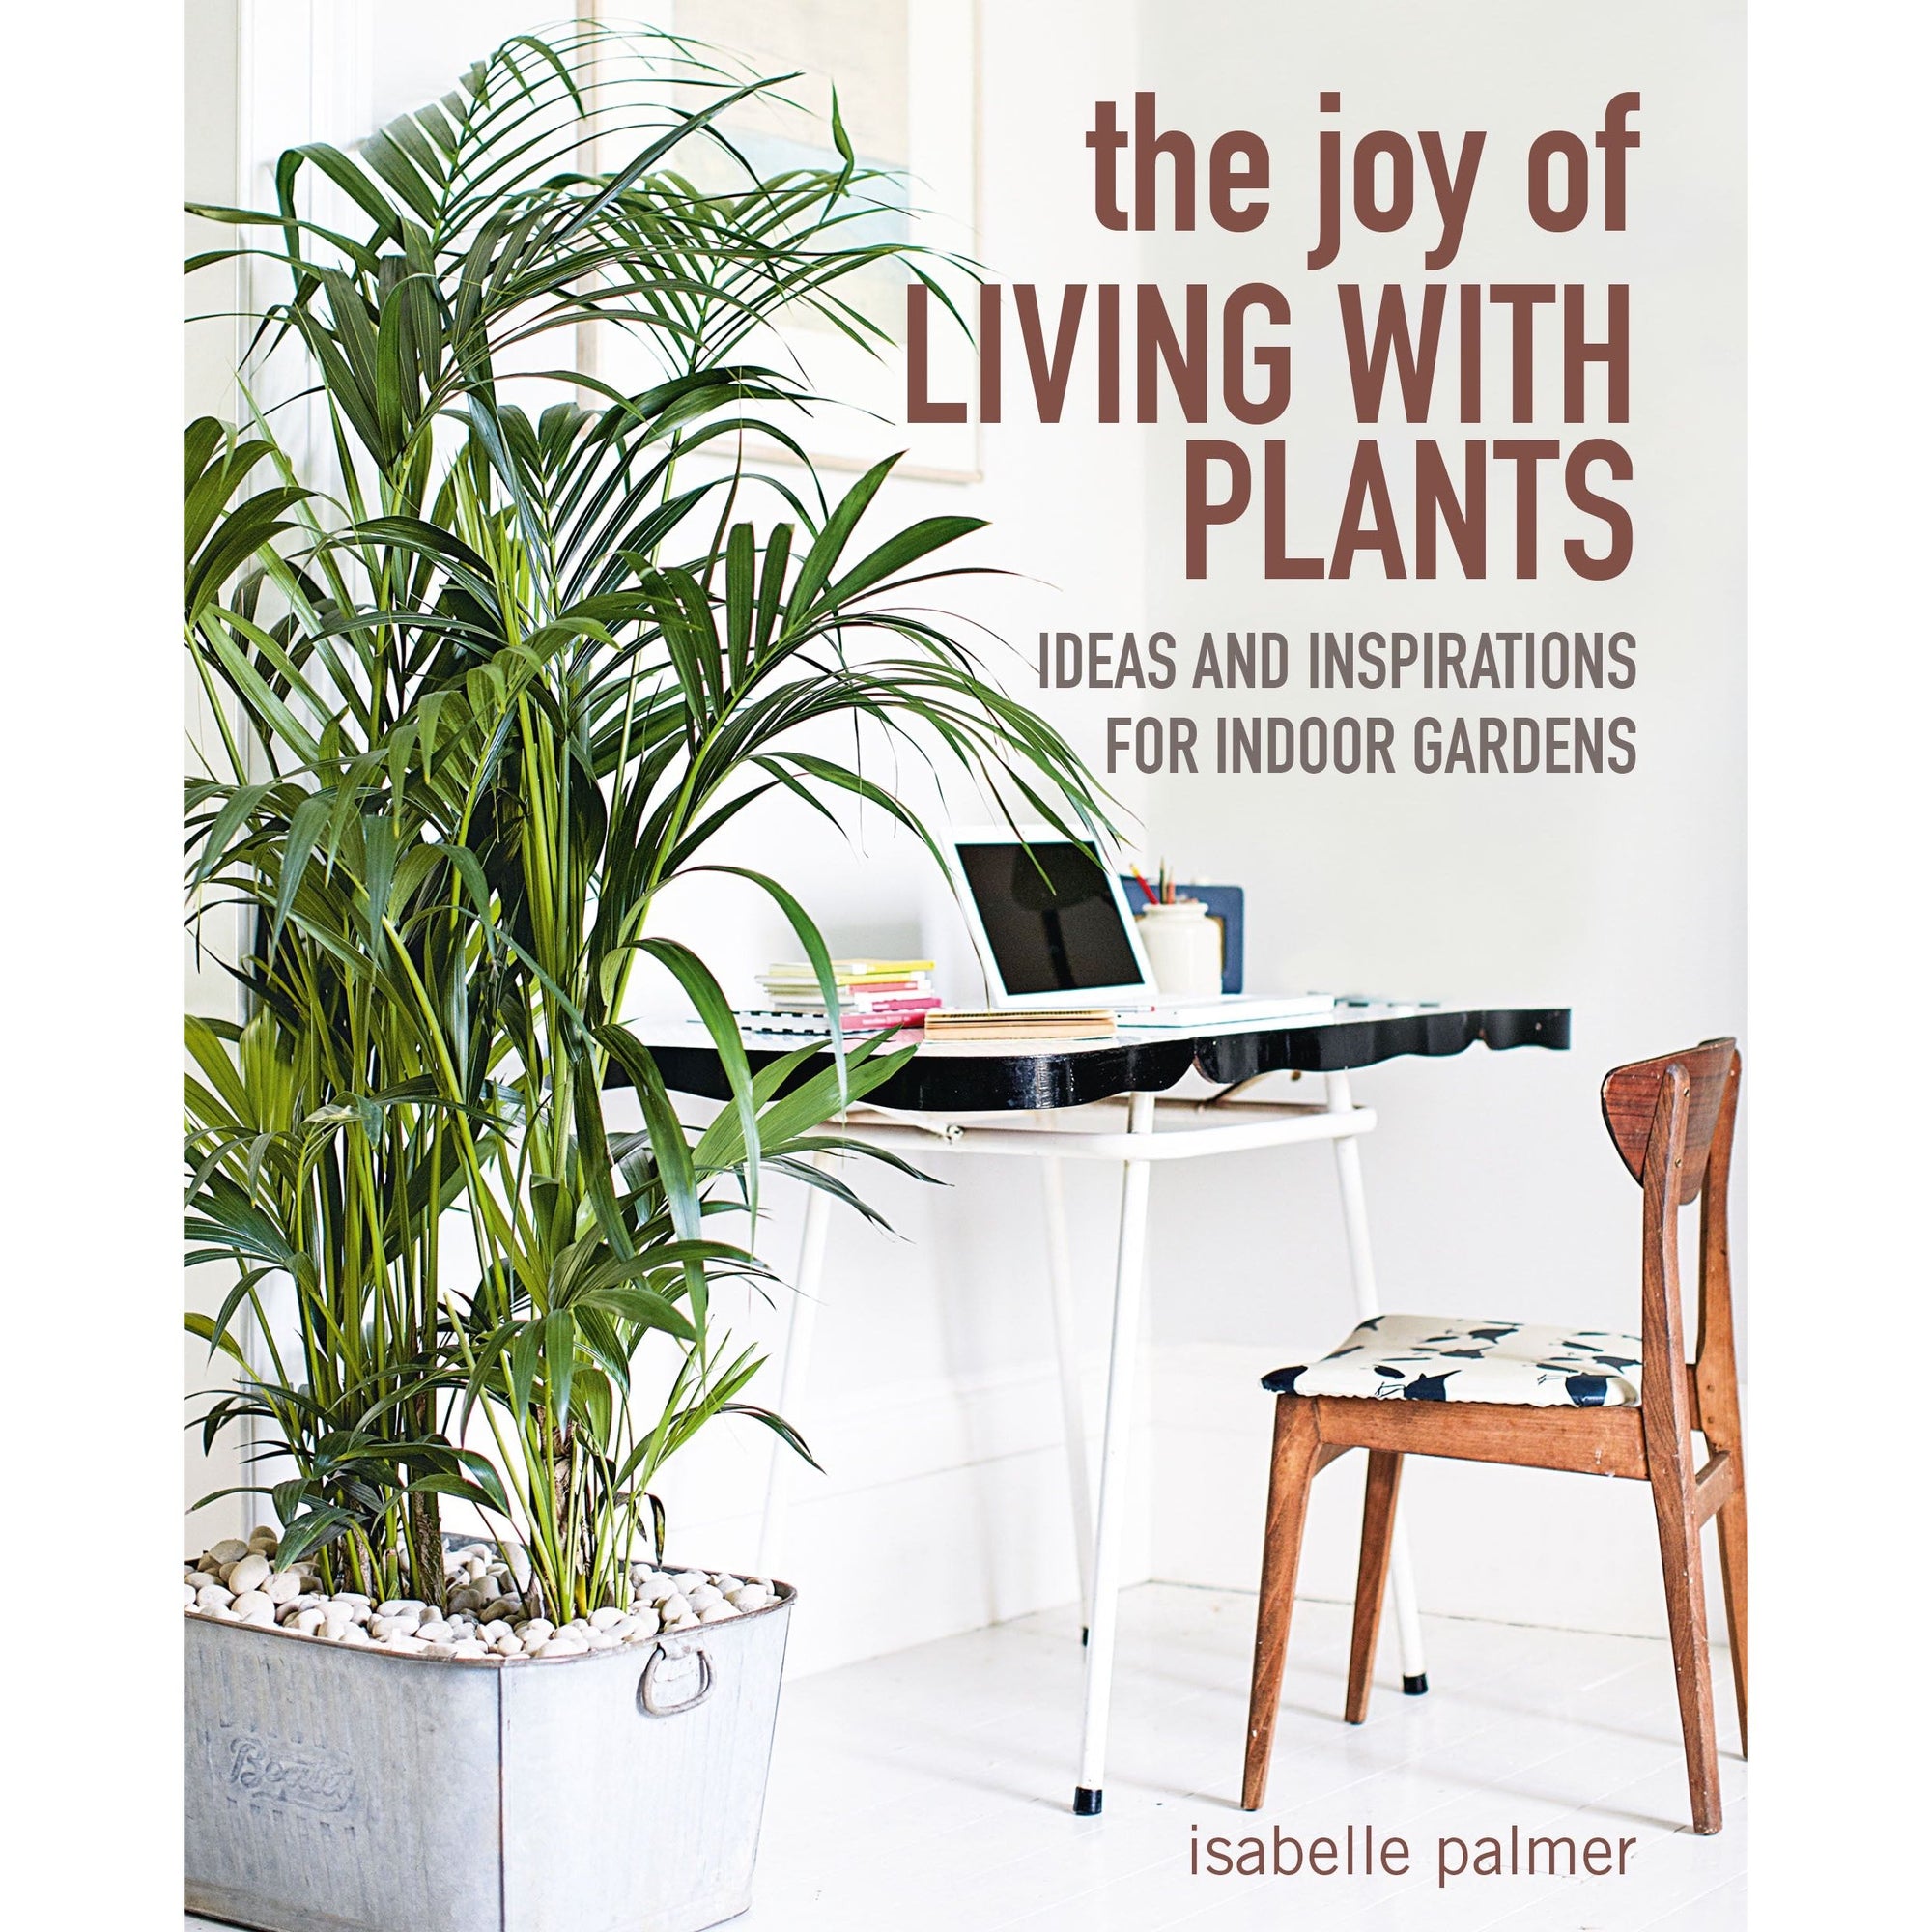 The Joy Of Living With Plants - Urban Naturals